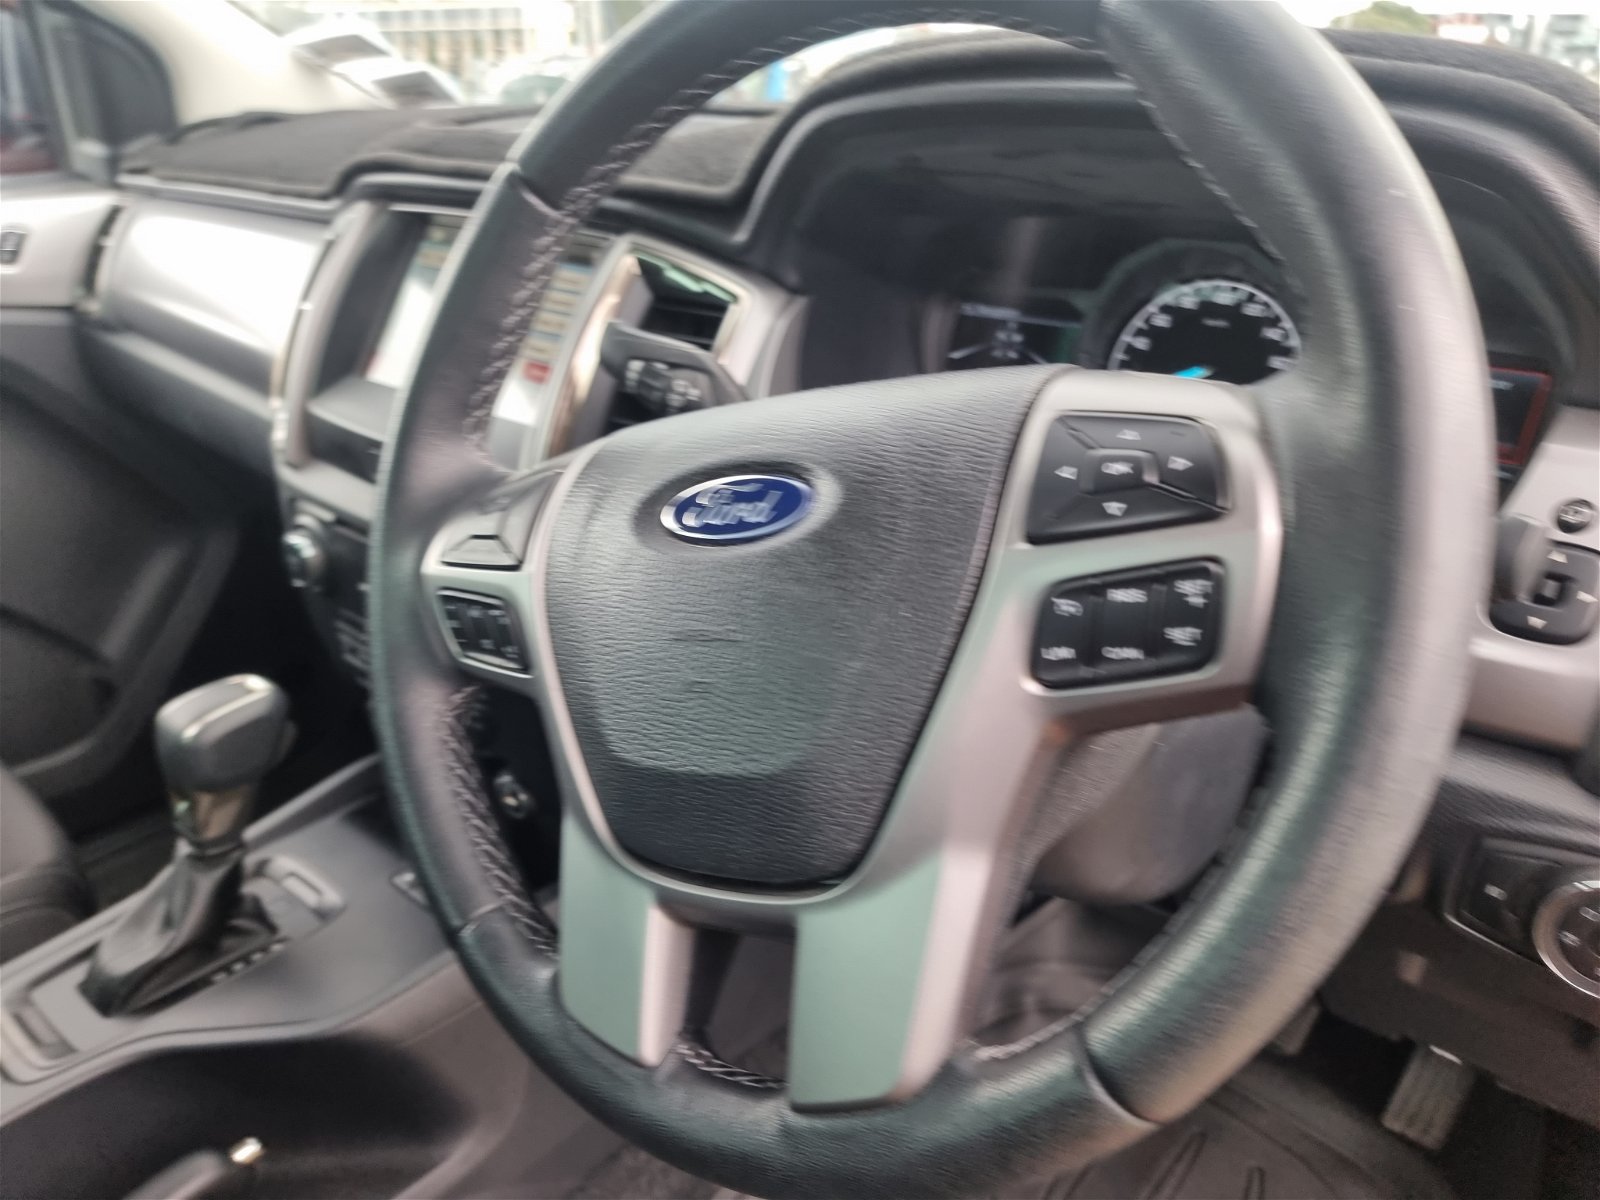 2019 Ford Ranger Xlt Double Cab W/S 3